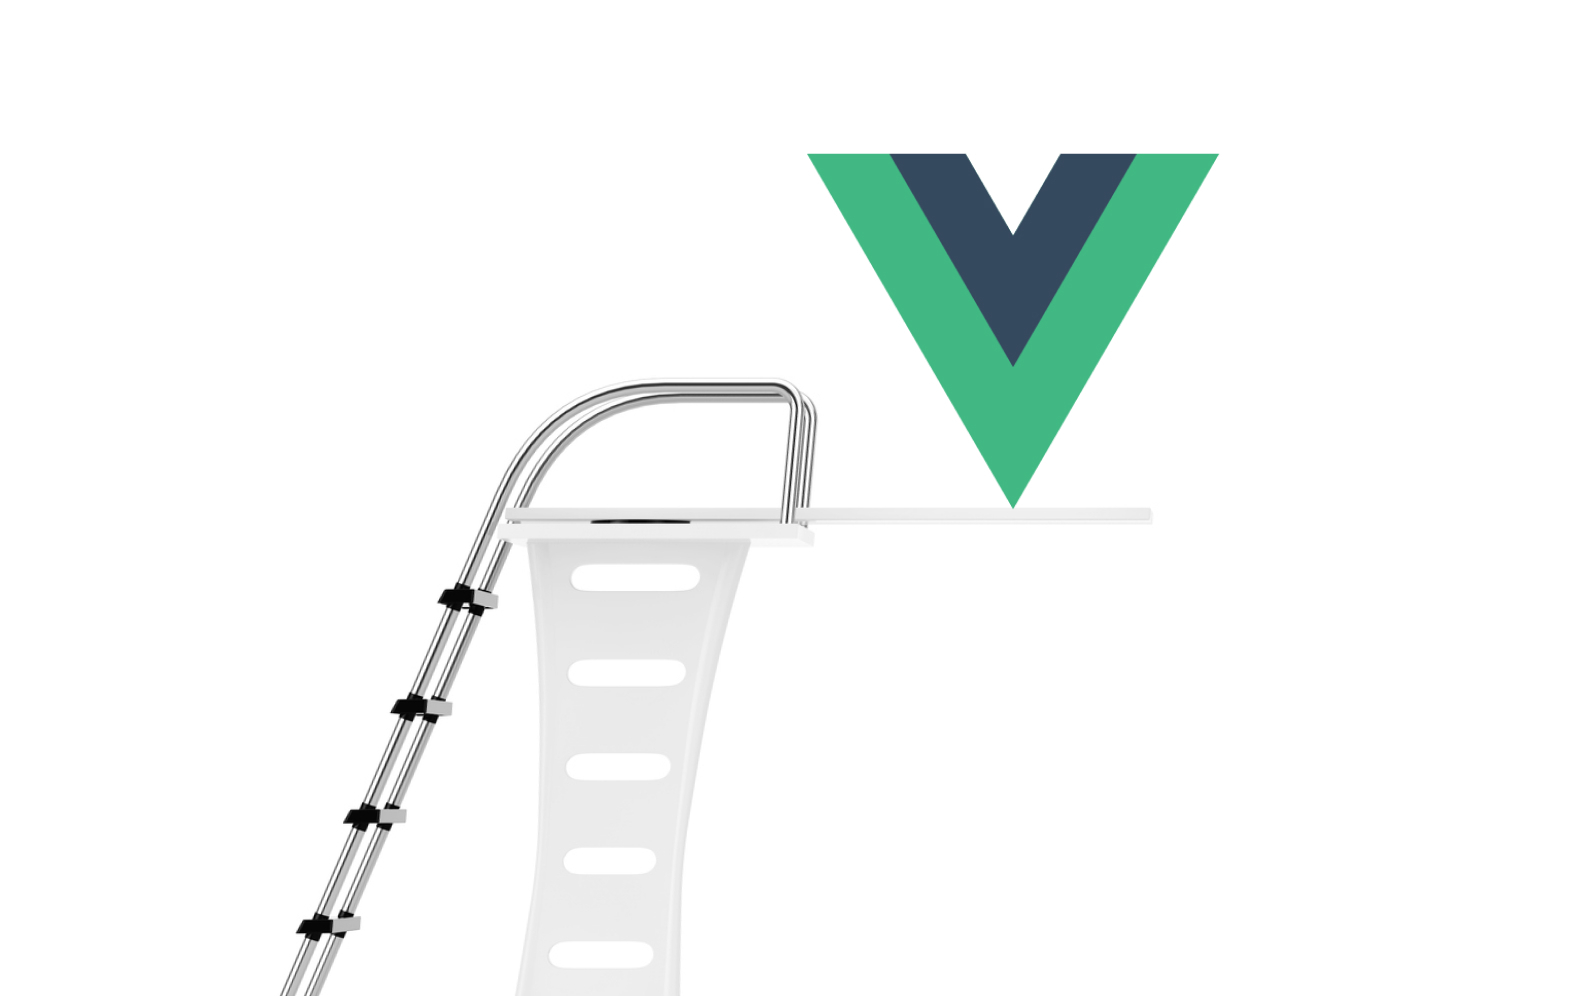 Blog title image for the blog post: Diving Into Vue 3 - The Reactivity API